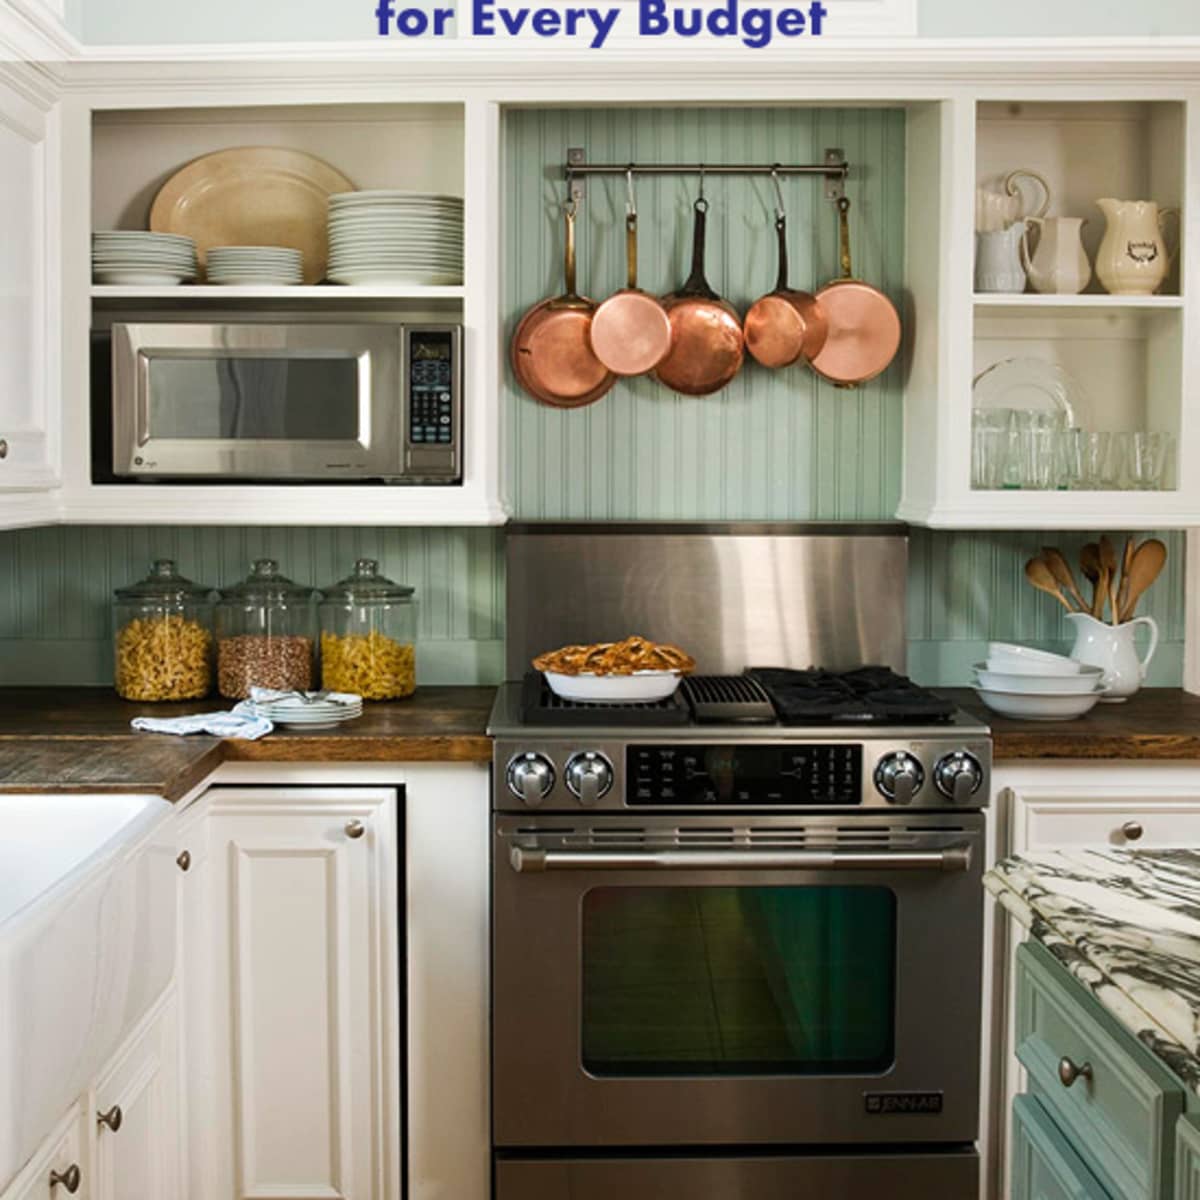 Best Cooking Items for Small Kitchens and Small Budgets